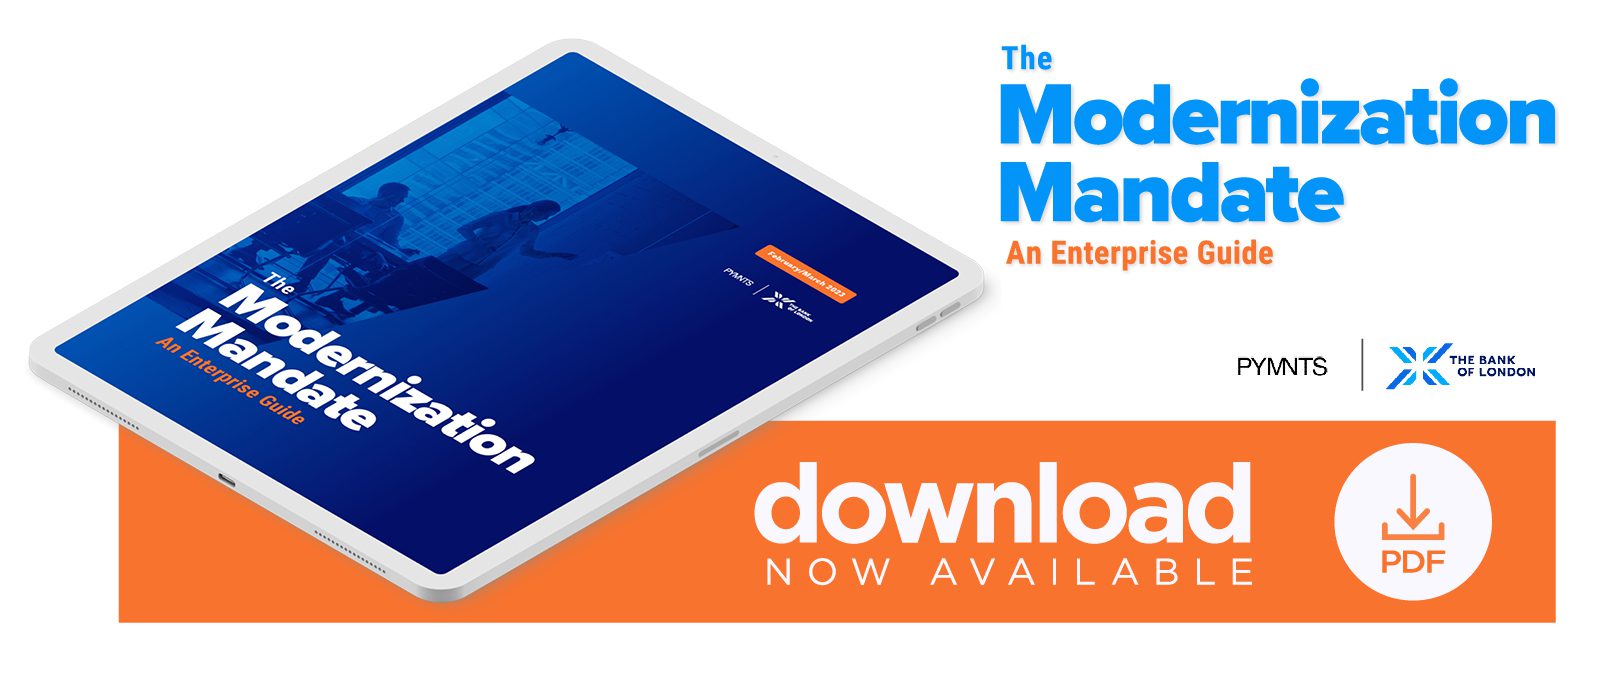 Download PYMNTS and The Bank of London's March 2023 report - The Modernization Mandate: An Enterprise Guide - to learn about the challenges facing enterprise organizations when attempting payments and IT modernization